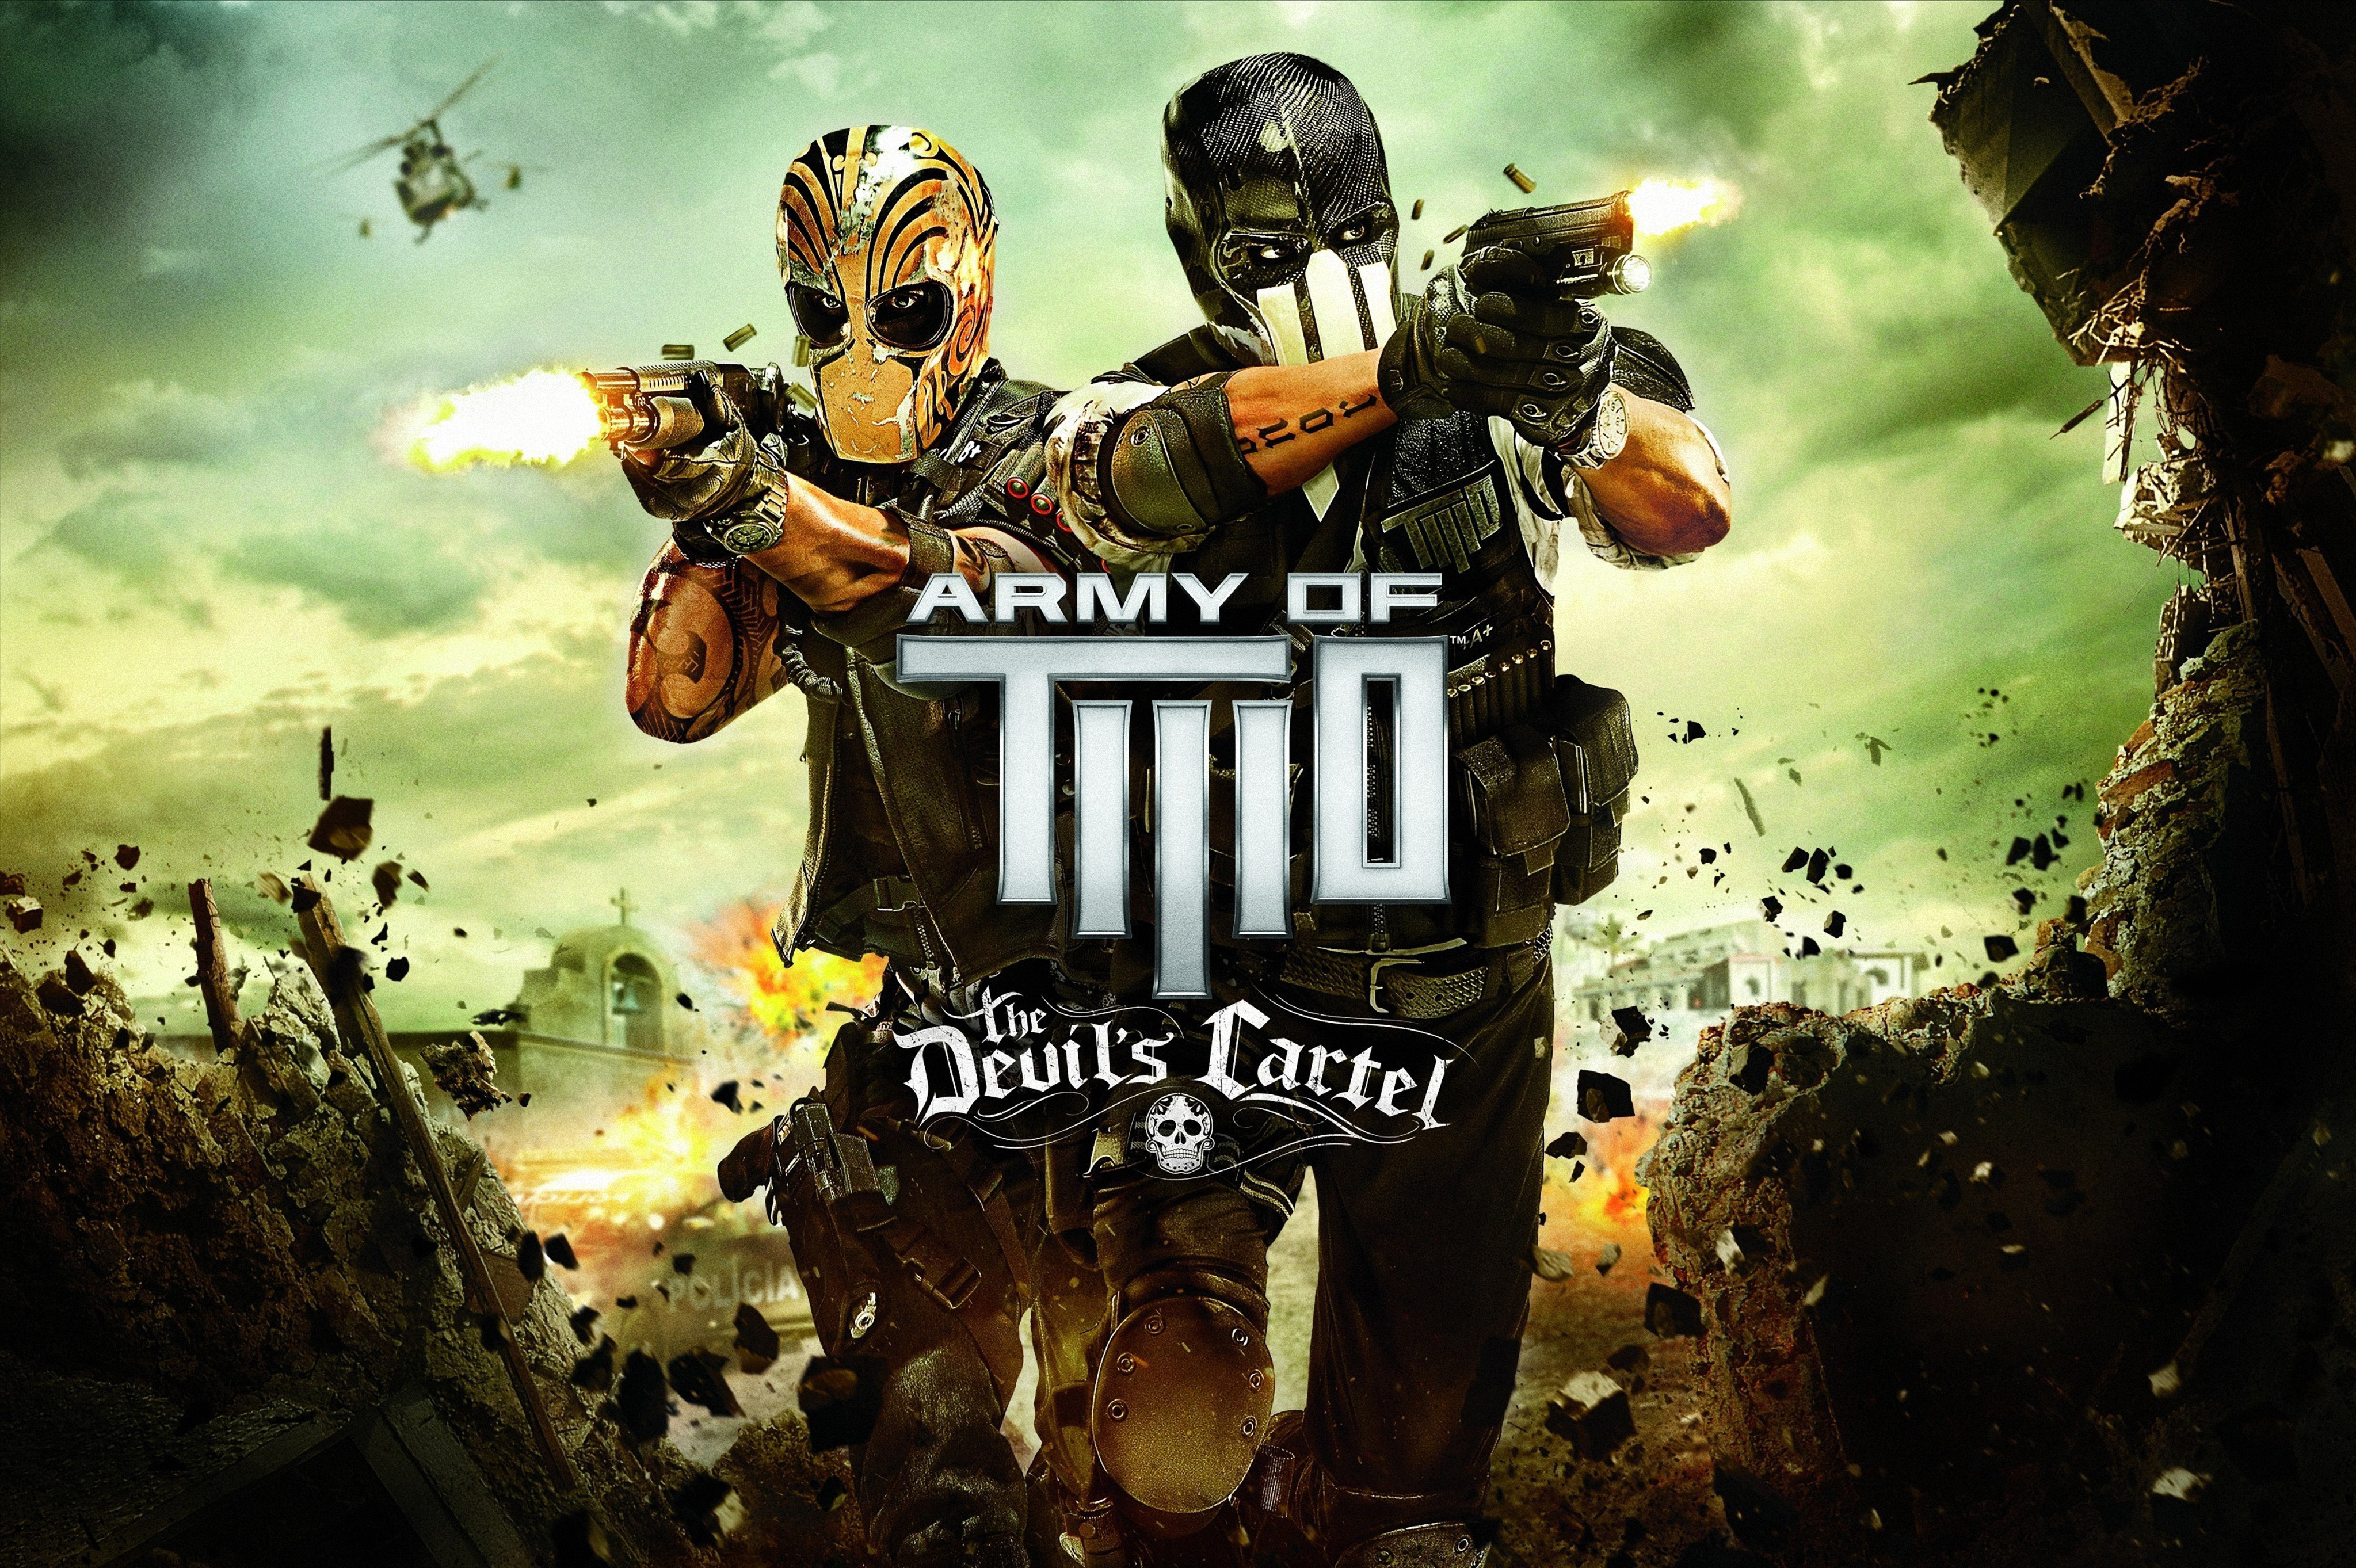 Game posters. Army of two the Devil's Cartel ps3. Army of two the Devil's Cartel ps3 обложка. Army of two the Devil's Cartel Xbox 360. Игра Army of two 3.